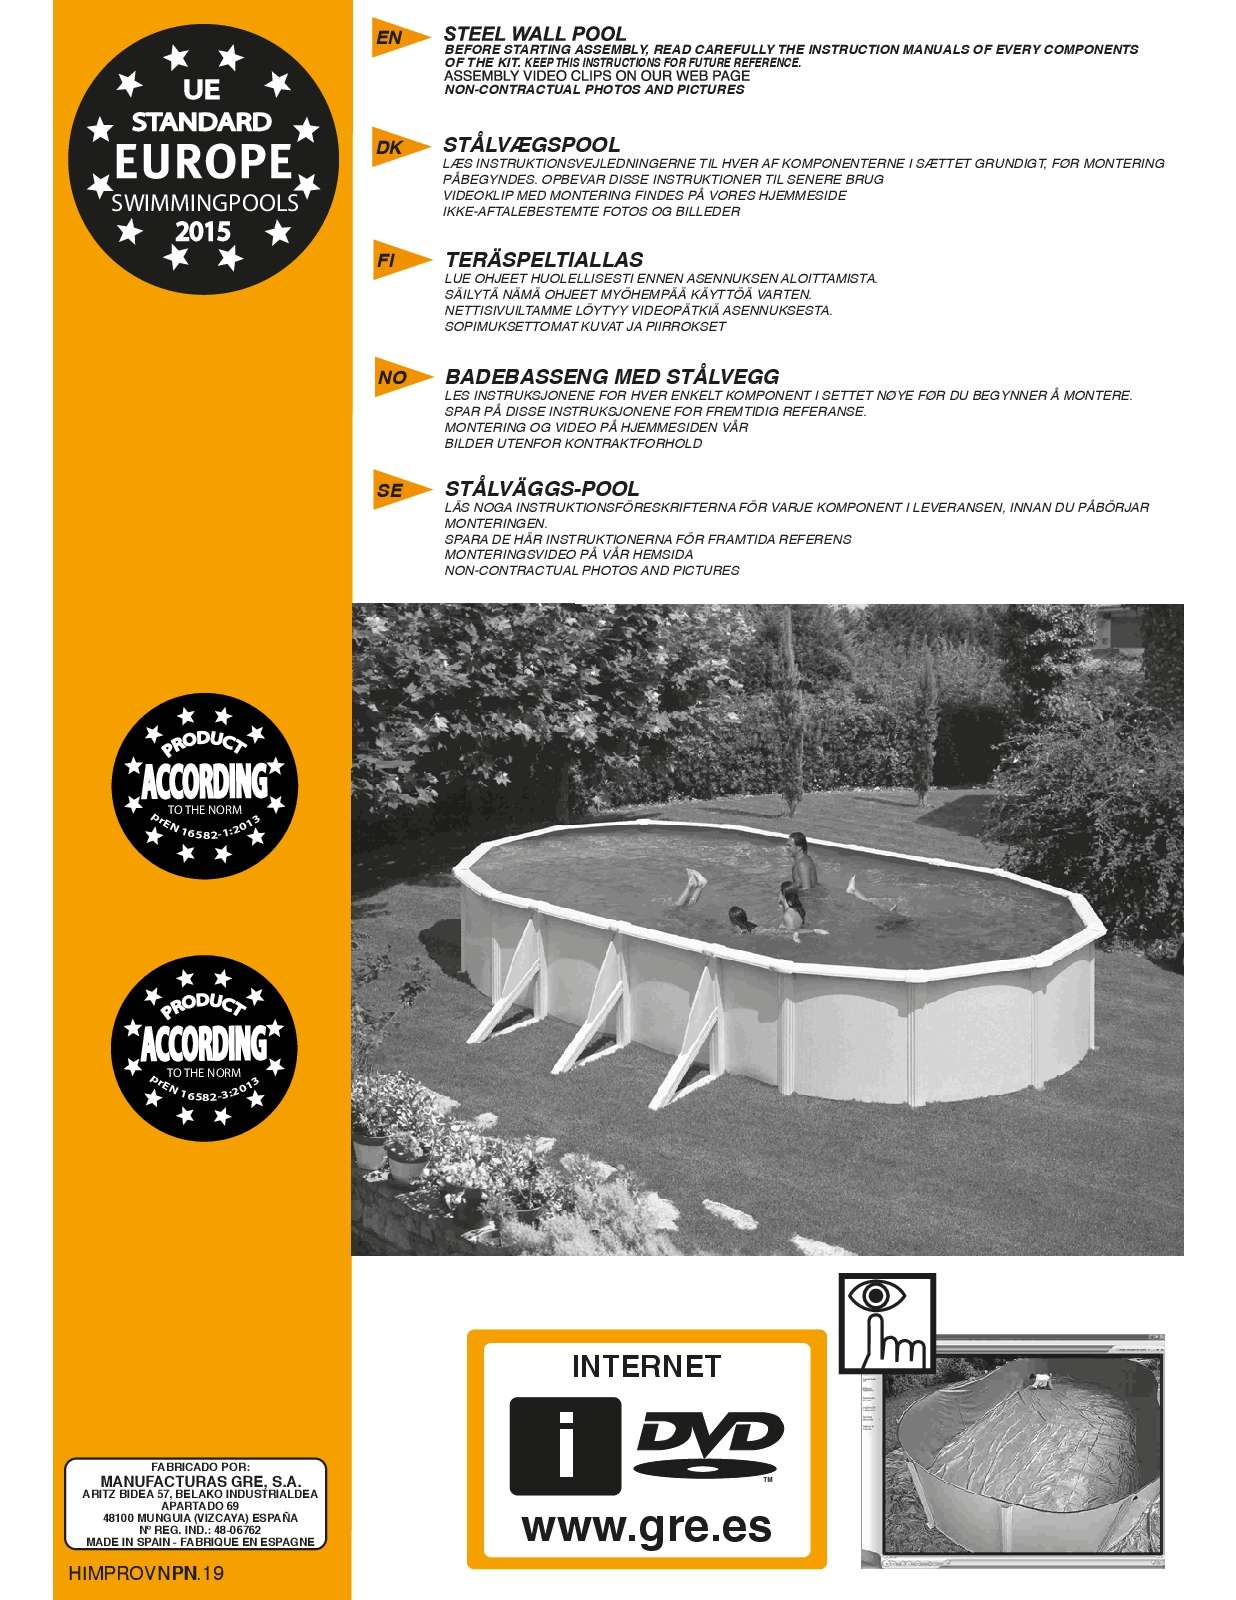 OVAL Pool with side supports - 2703, 2704, 2705, 2712, 2713, 2718, 2727, 2728, 2729, 2745, 2746, 2747, 2748